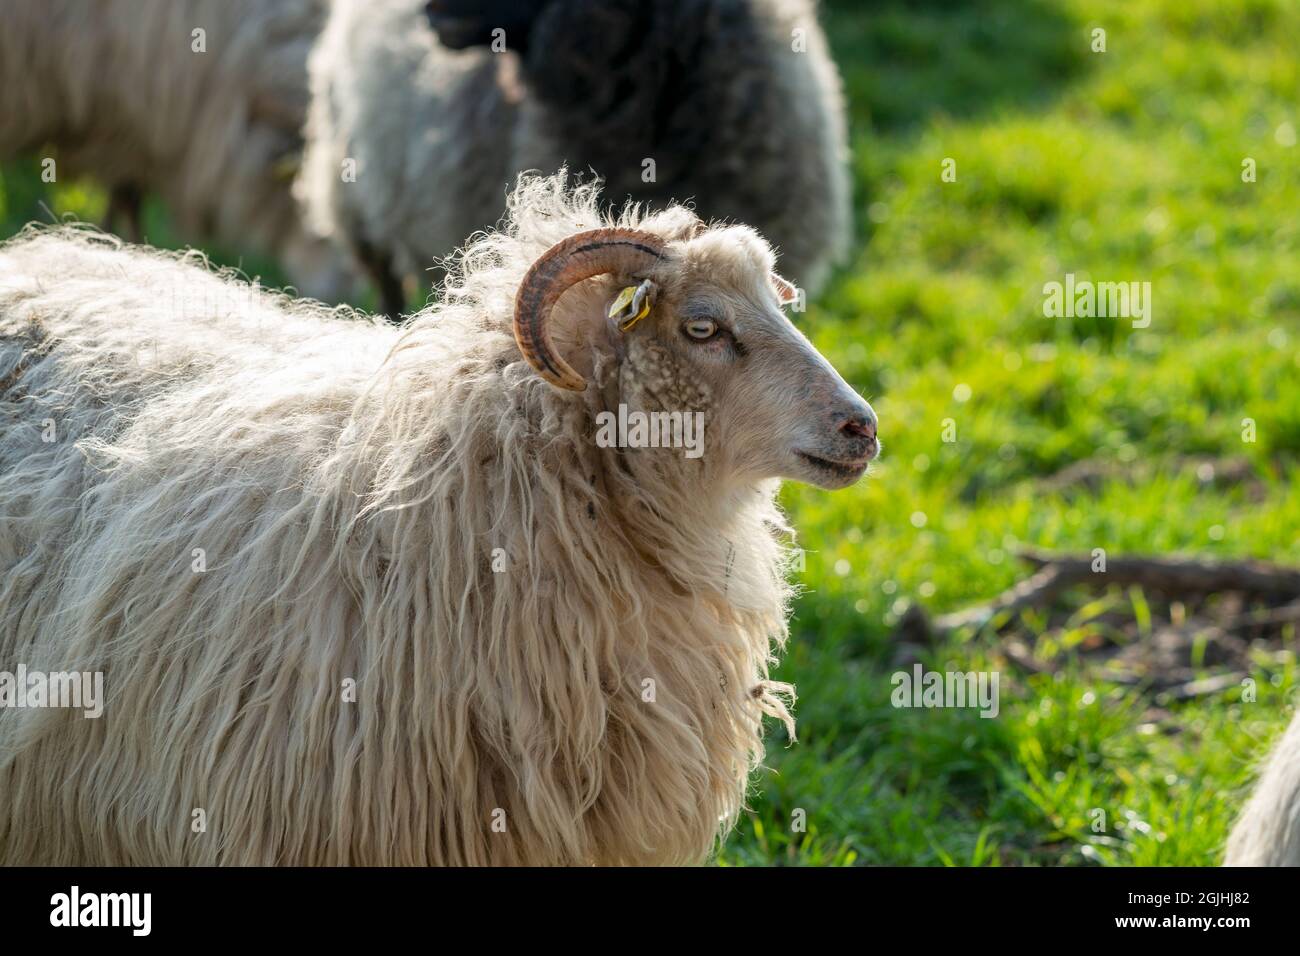 A little sheep on a meadow Stock Photo